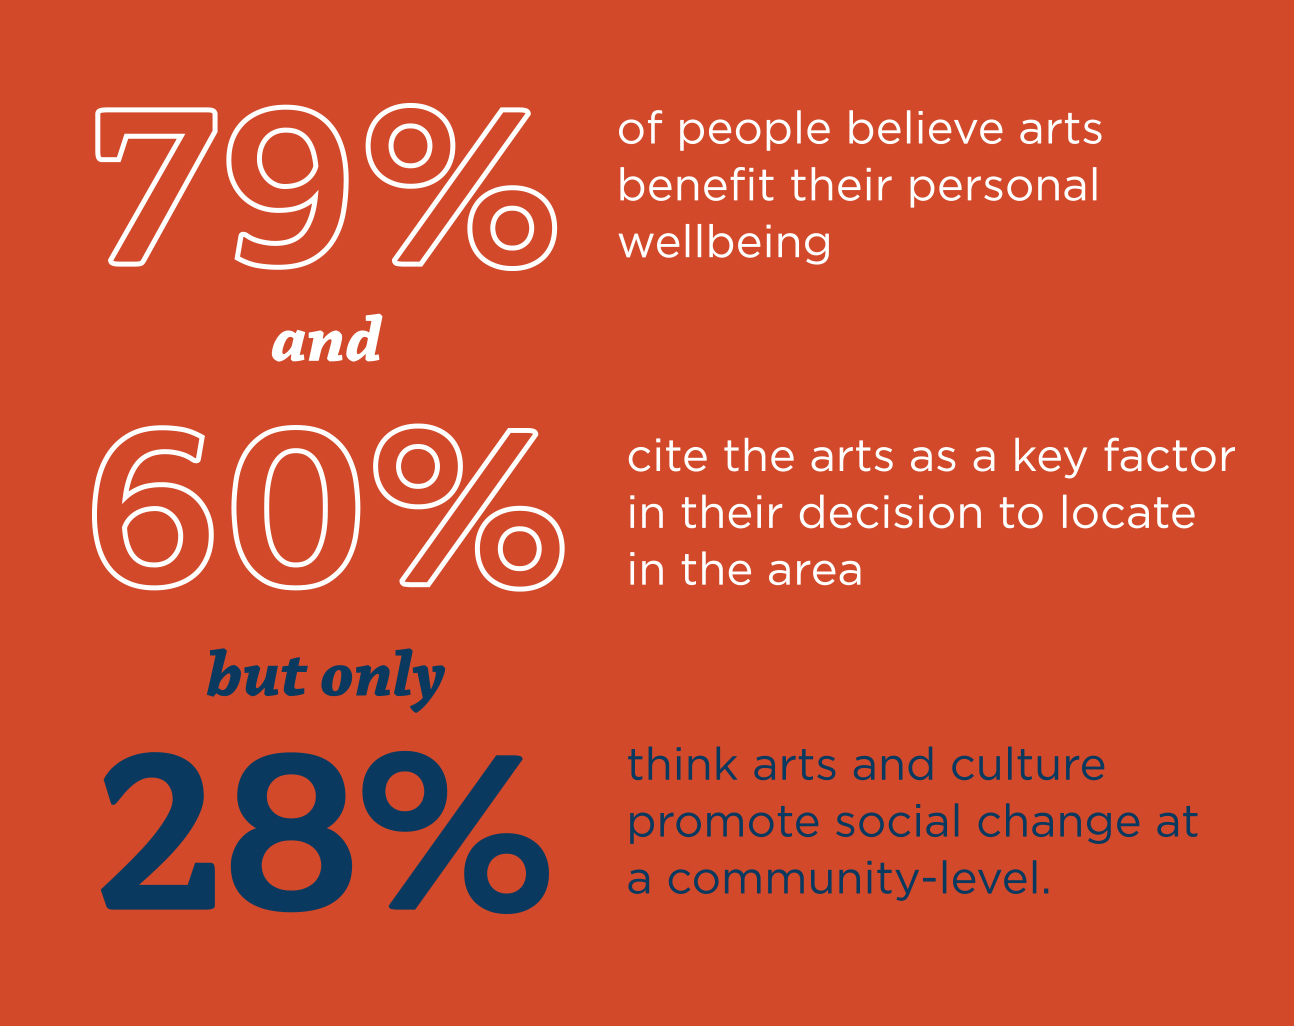 What is the social impact of arts?